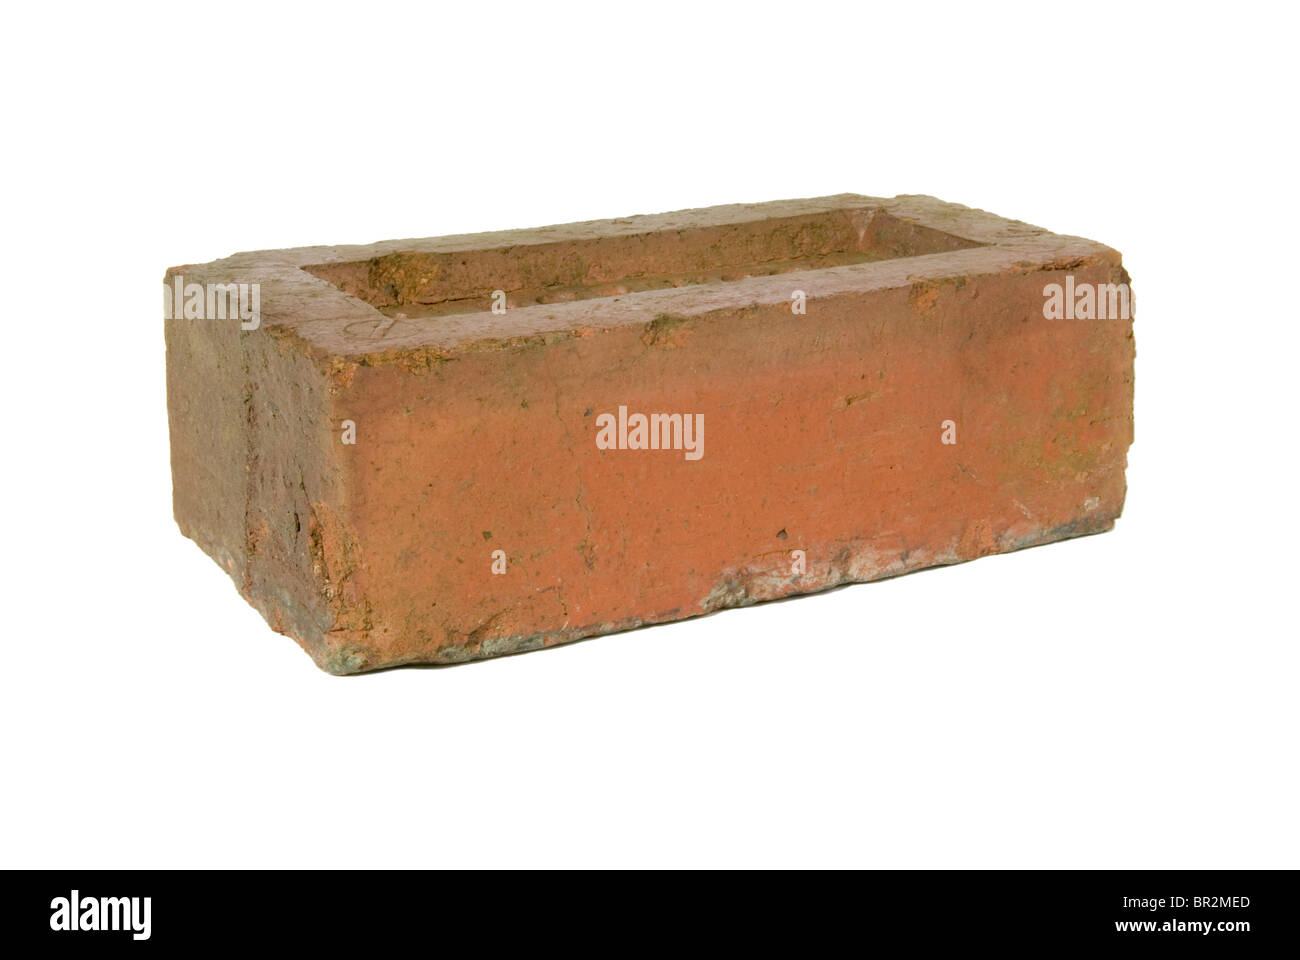 A single red house brick Stock Photo